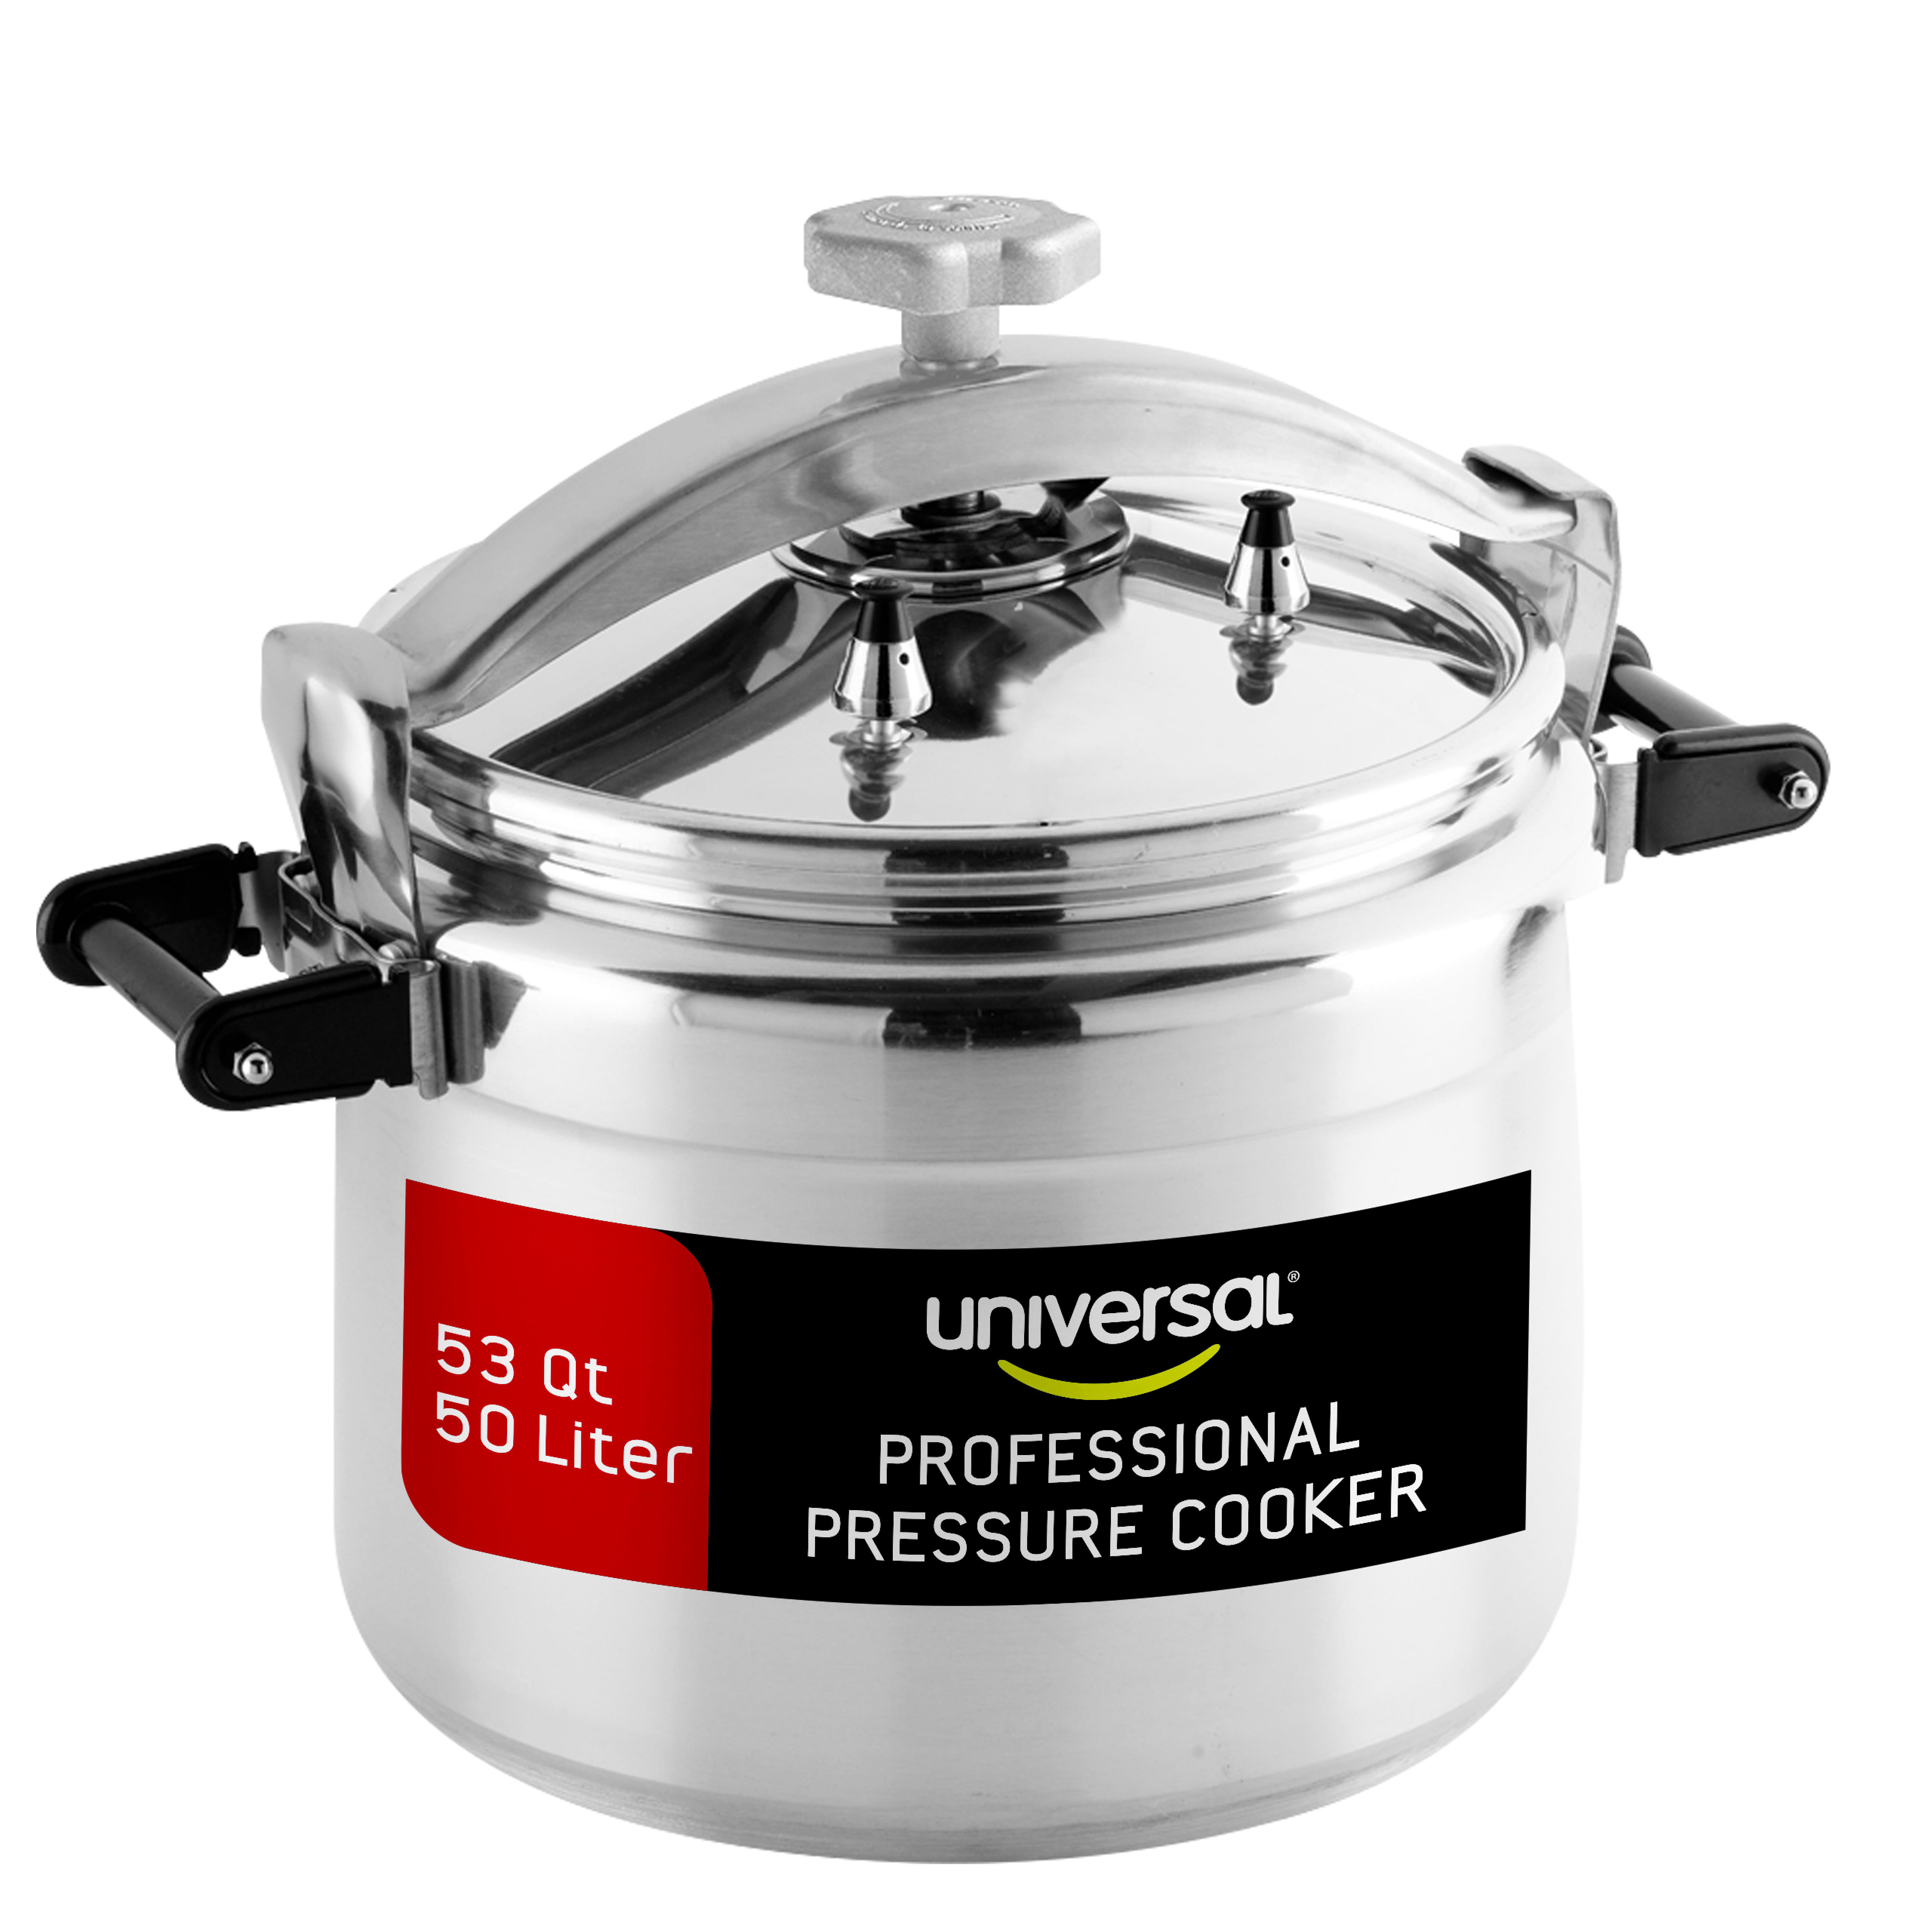 Universal 15.8Qt / 15L Professional Pressure Cooker, Sturdy, Heavy-Duty Aluminum Construction with Multiple Safety Systems, Silver